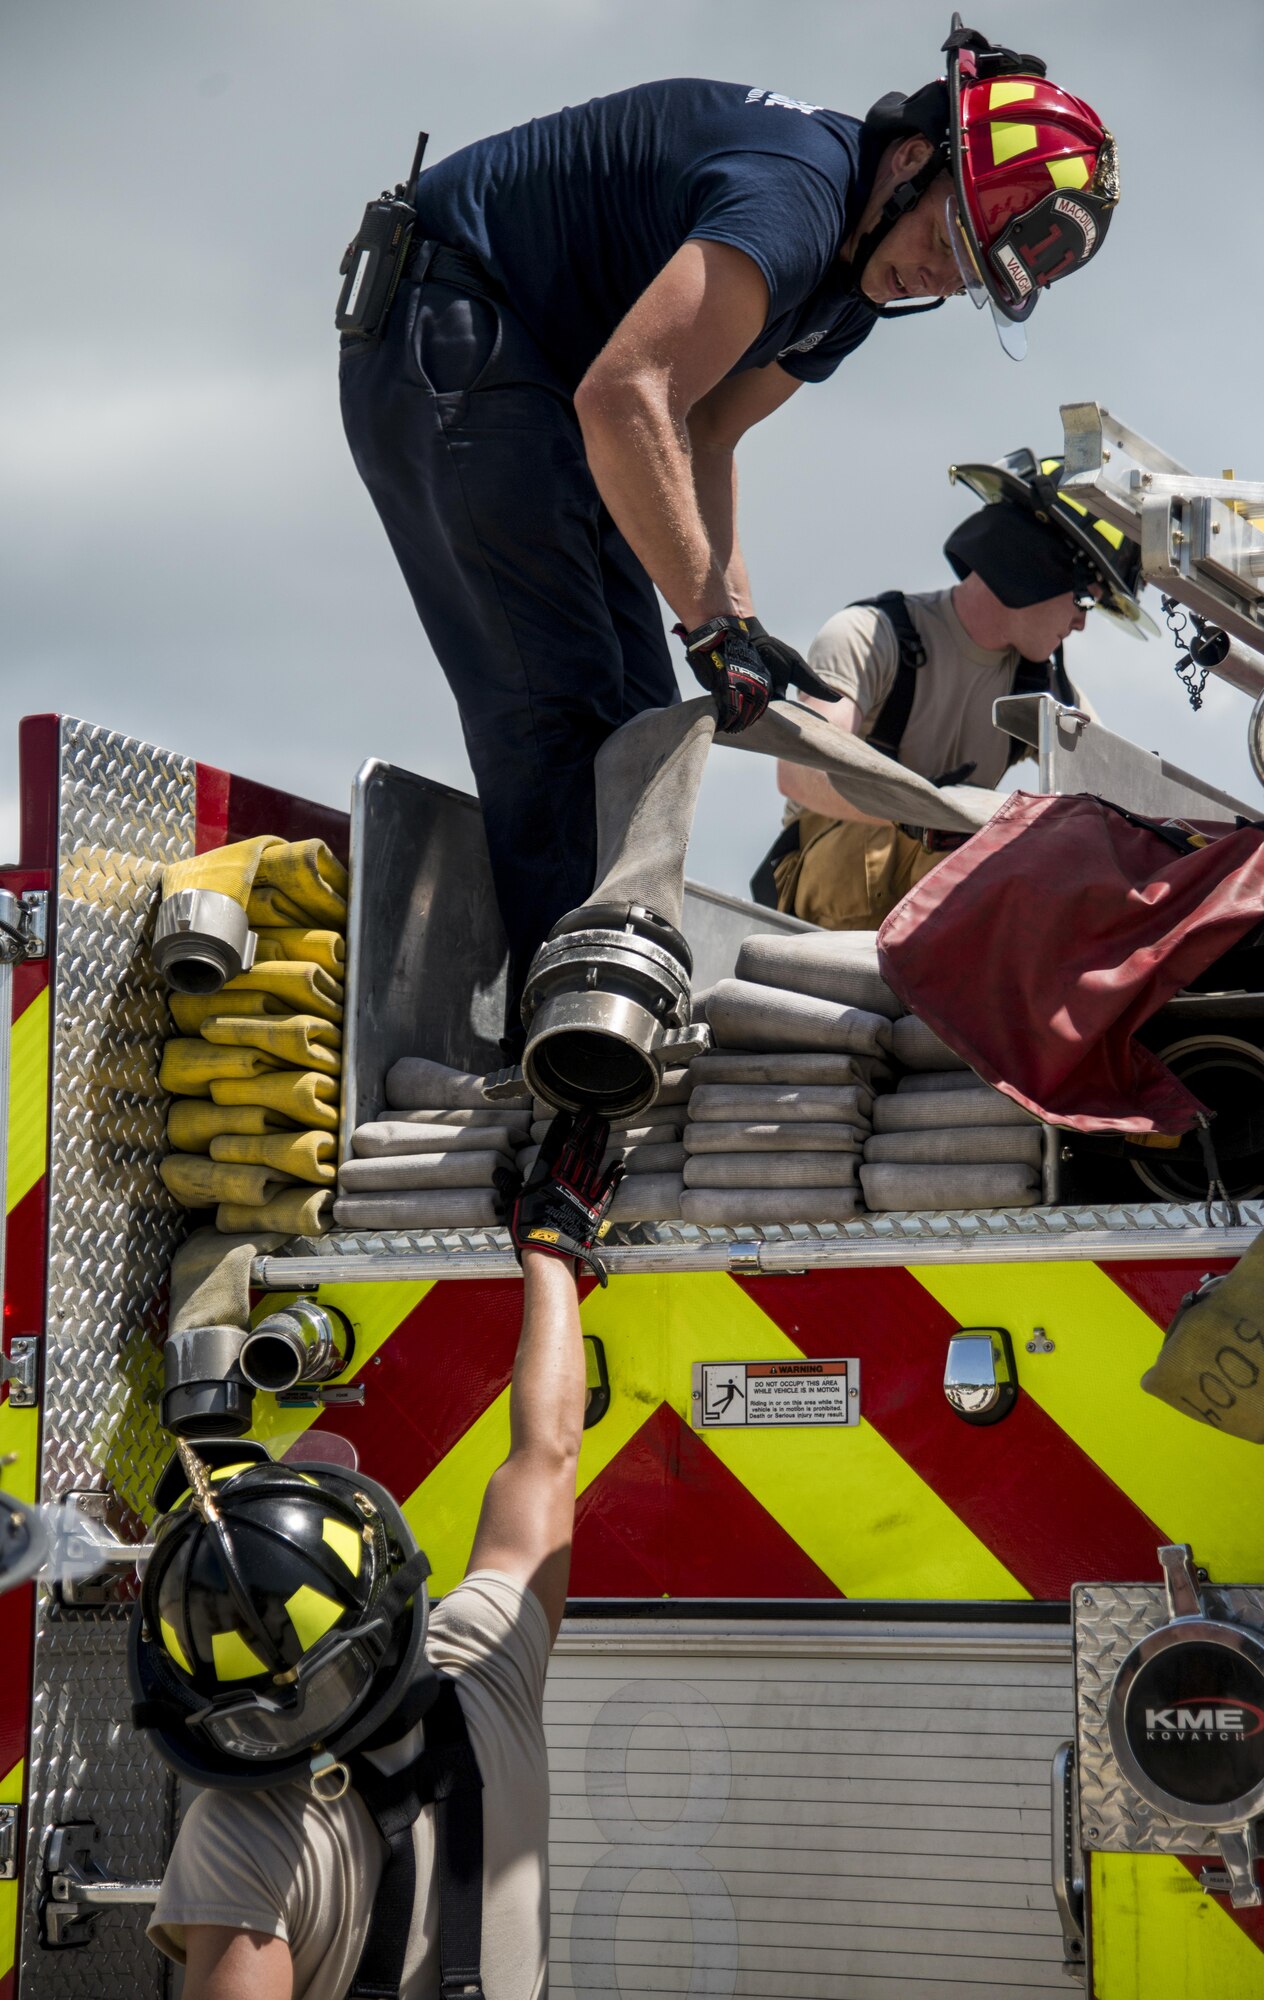 Stuart Vaughn, a fire protection crew chief assigned to the 6th Civil Engineer Squadron, assists in putting away a hose after a structural, live-burn exercise at MacDill Air Force Base, Fla., July 24, 2017. Vaughan was the safety officer during the exercise, ensuring the firefighters inside the burning building were safe at all times. (U.S. Air Force photo by Airman 1st Class Adam R. Shanks)